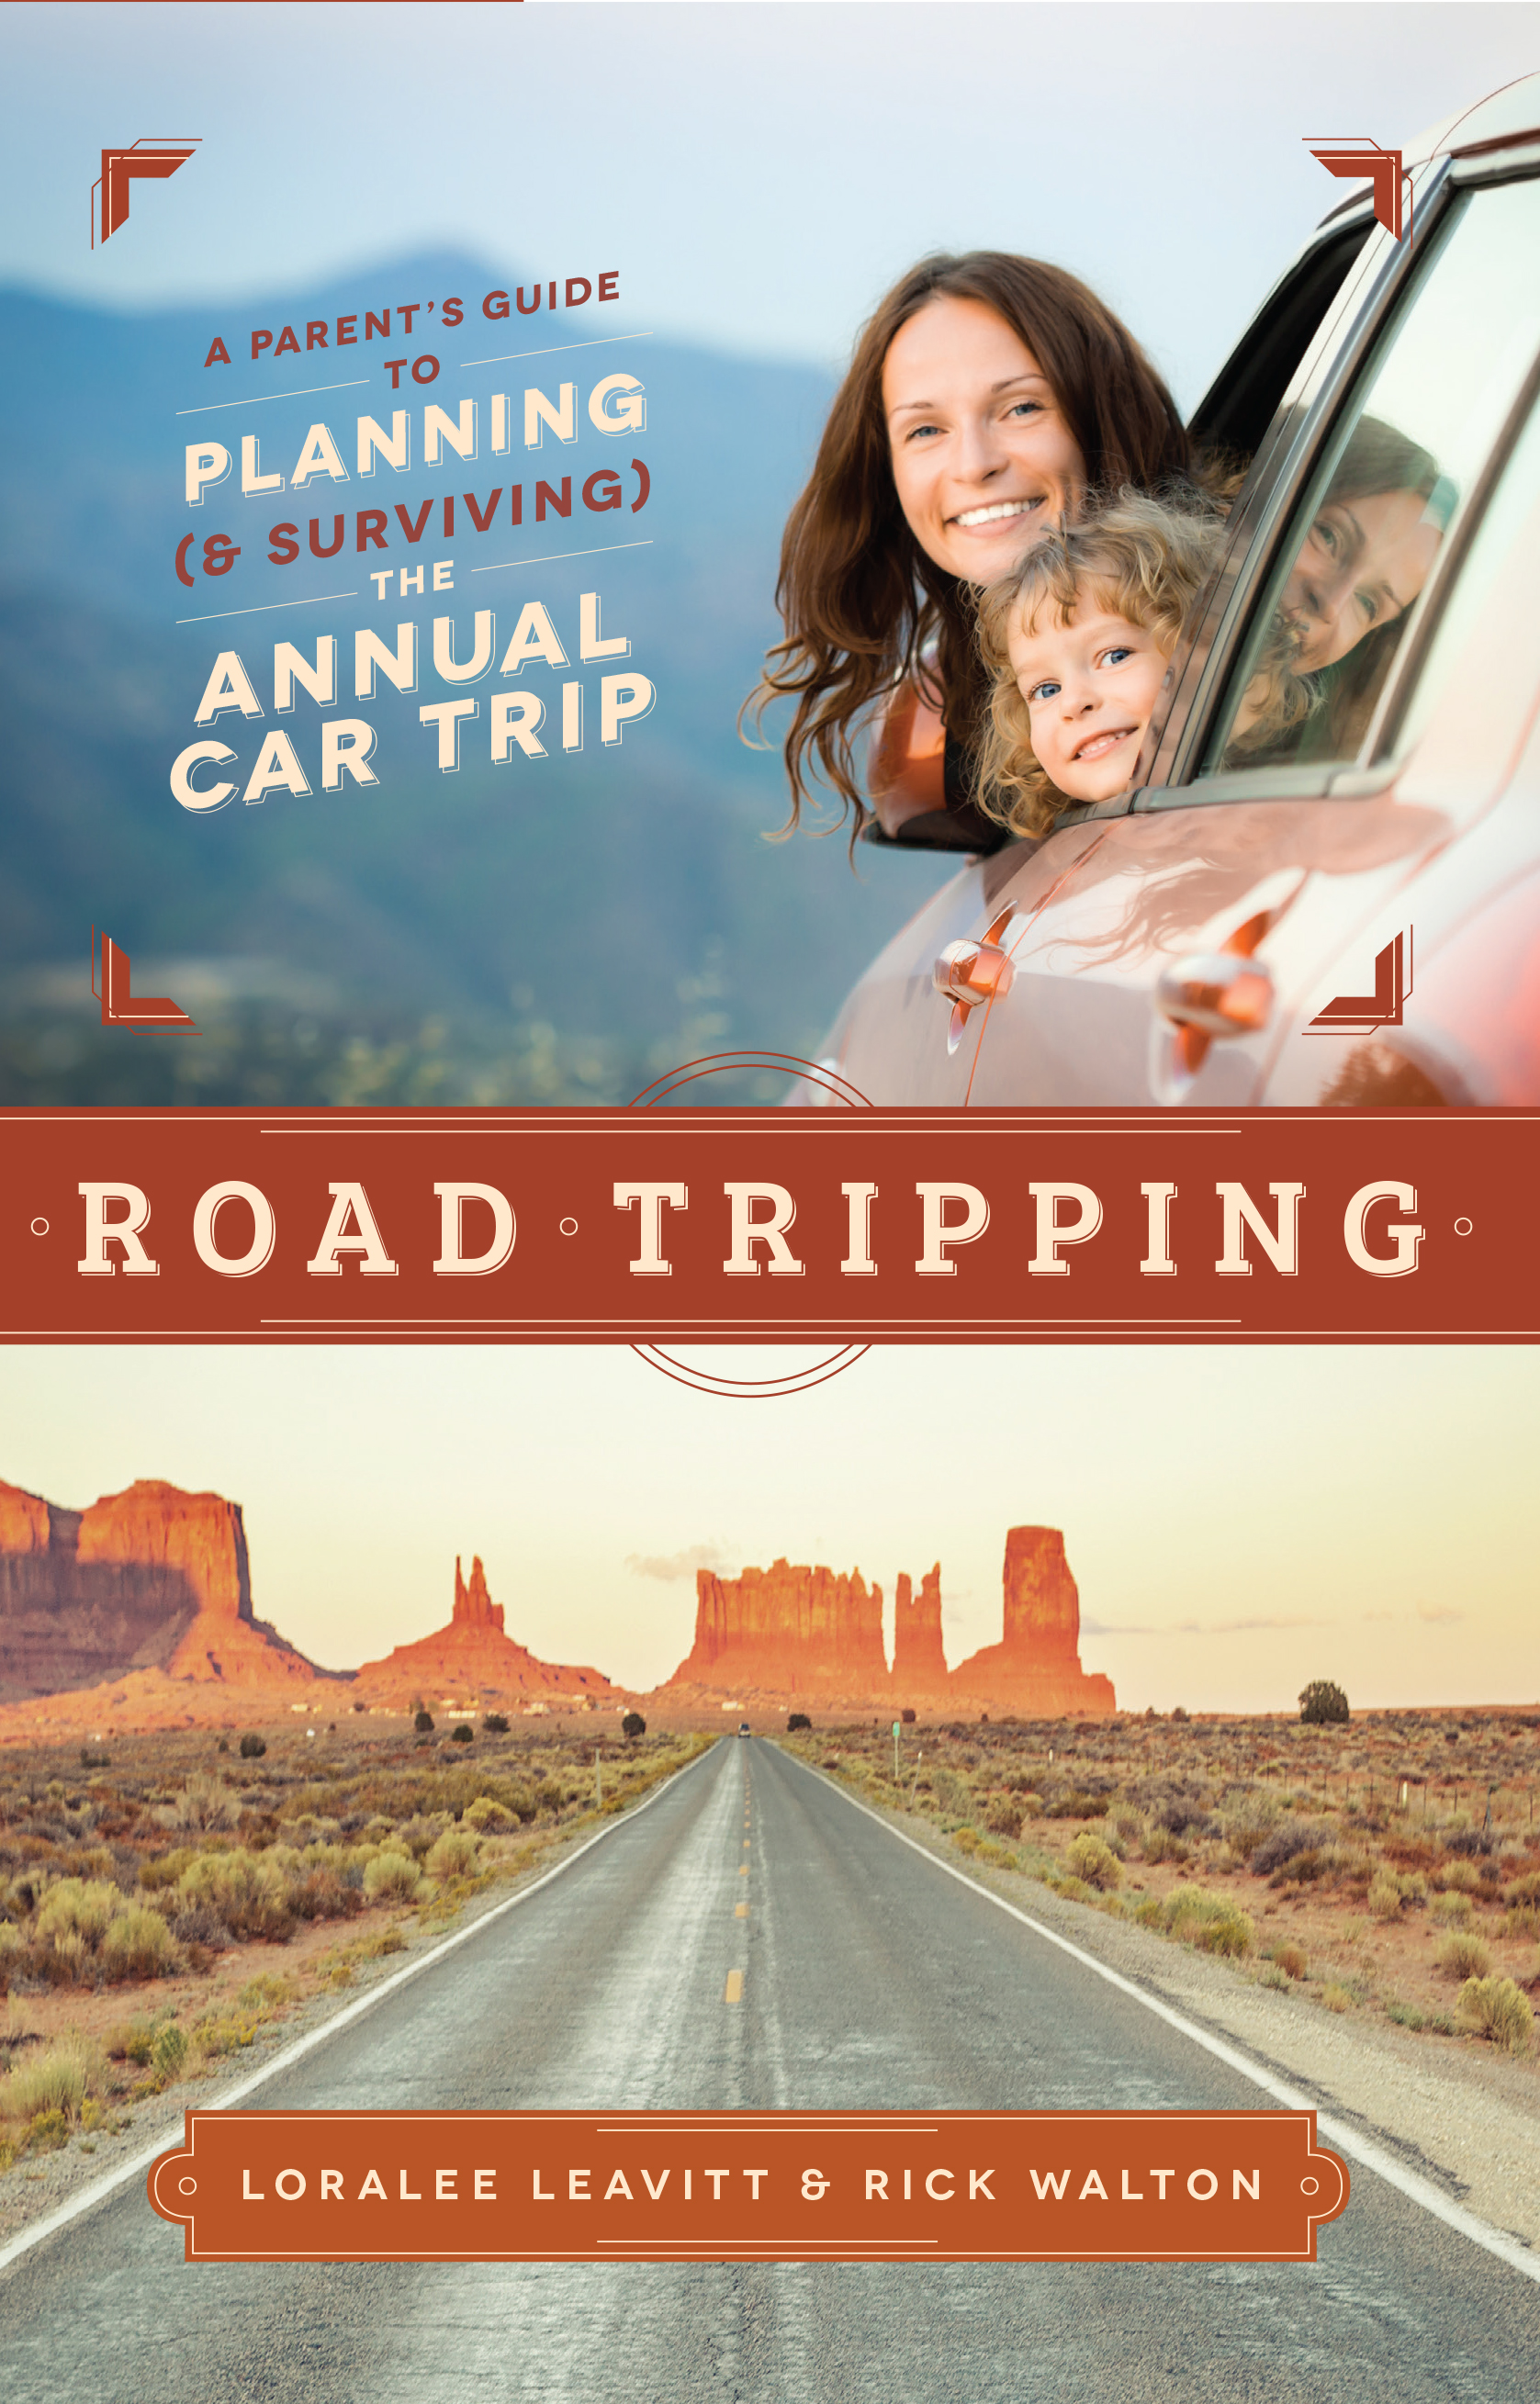 Road Tripping with your Kids: A Survival Guide – Rachel Parcell, Inc.